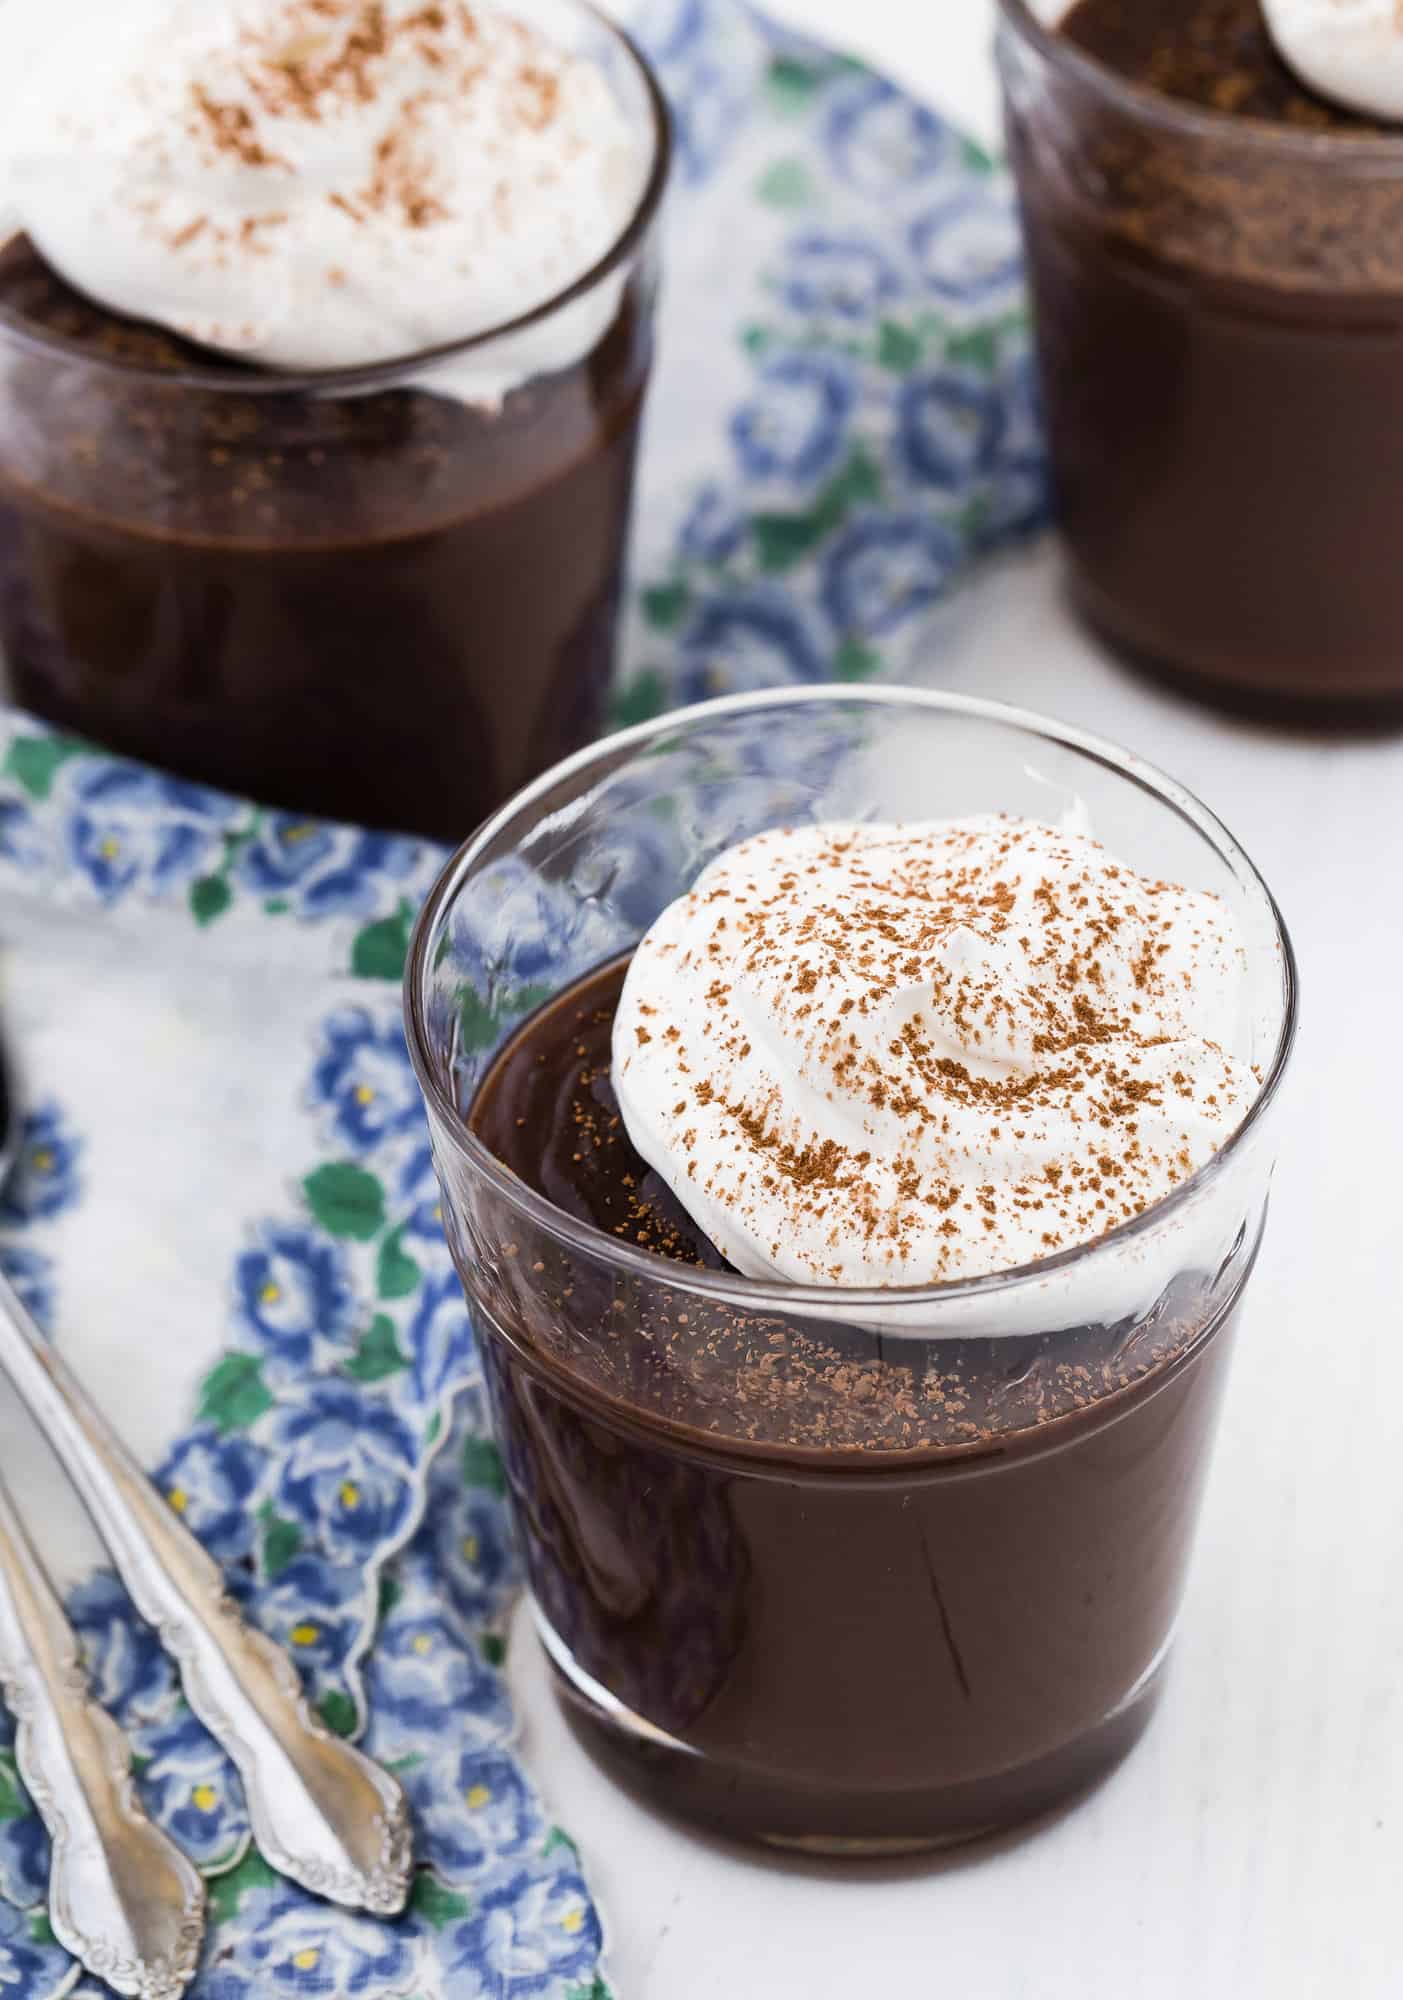 Chocolate pudding in glass cup.